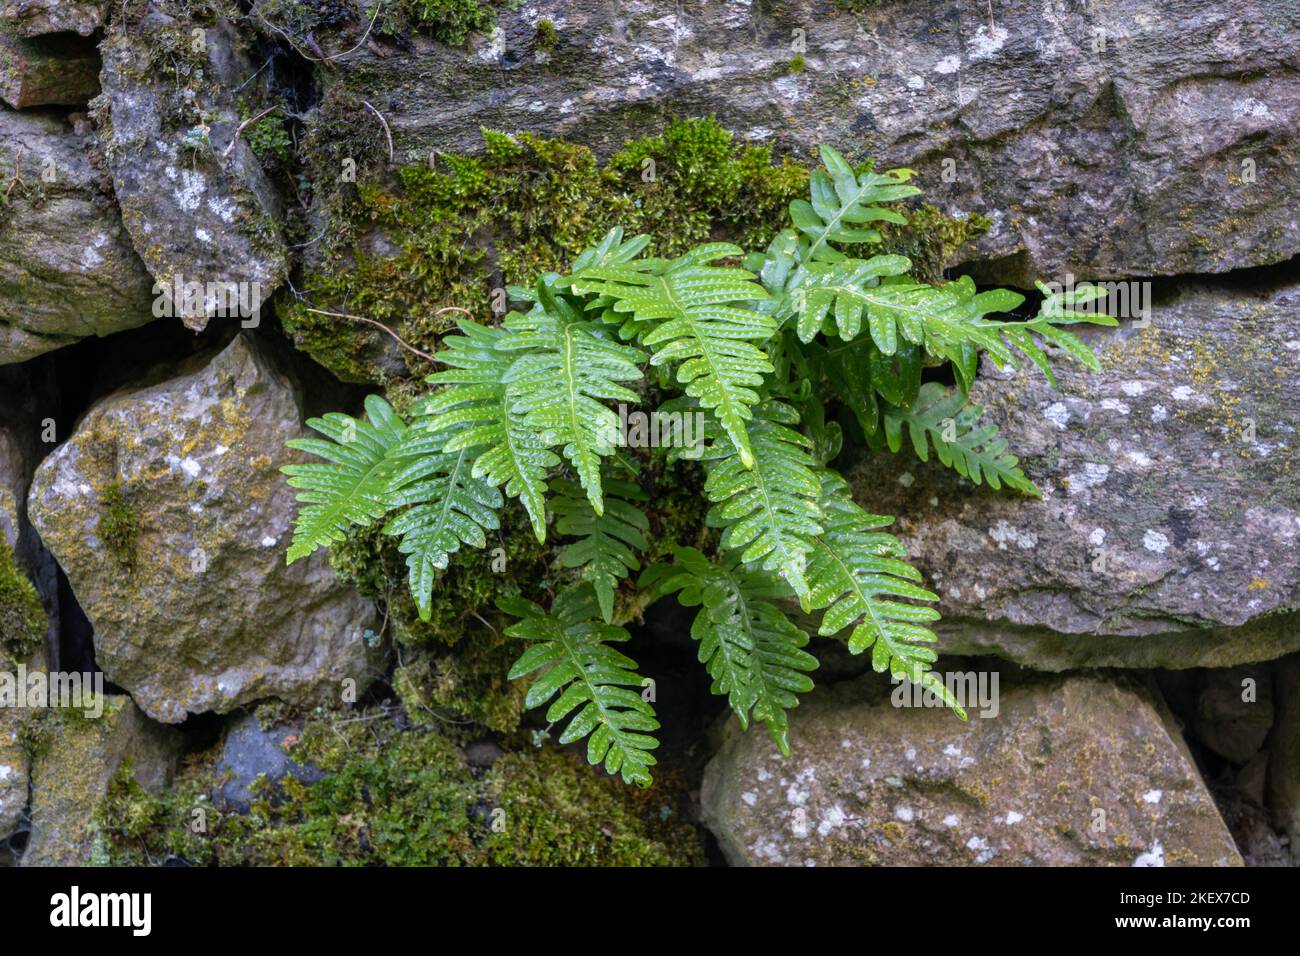 Closeup view of bright green fronds of polypodium cambricum aka southern polypody or limestone polypody after the rain on old mossy stone wall Stock Photo